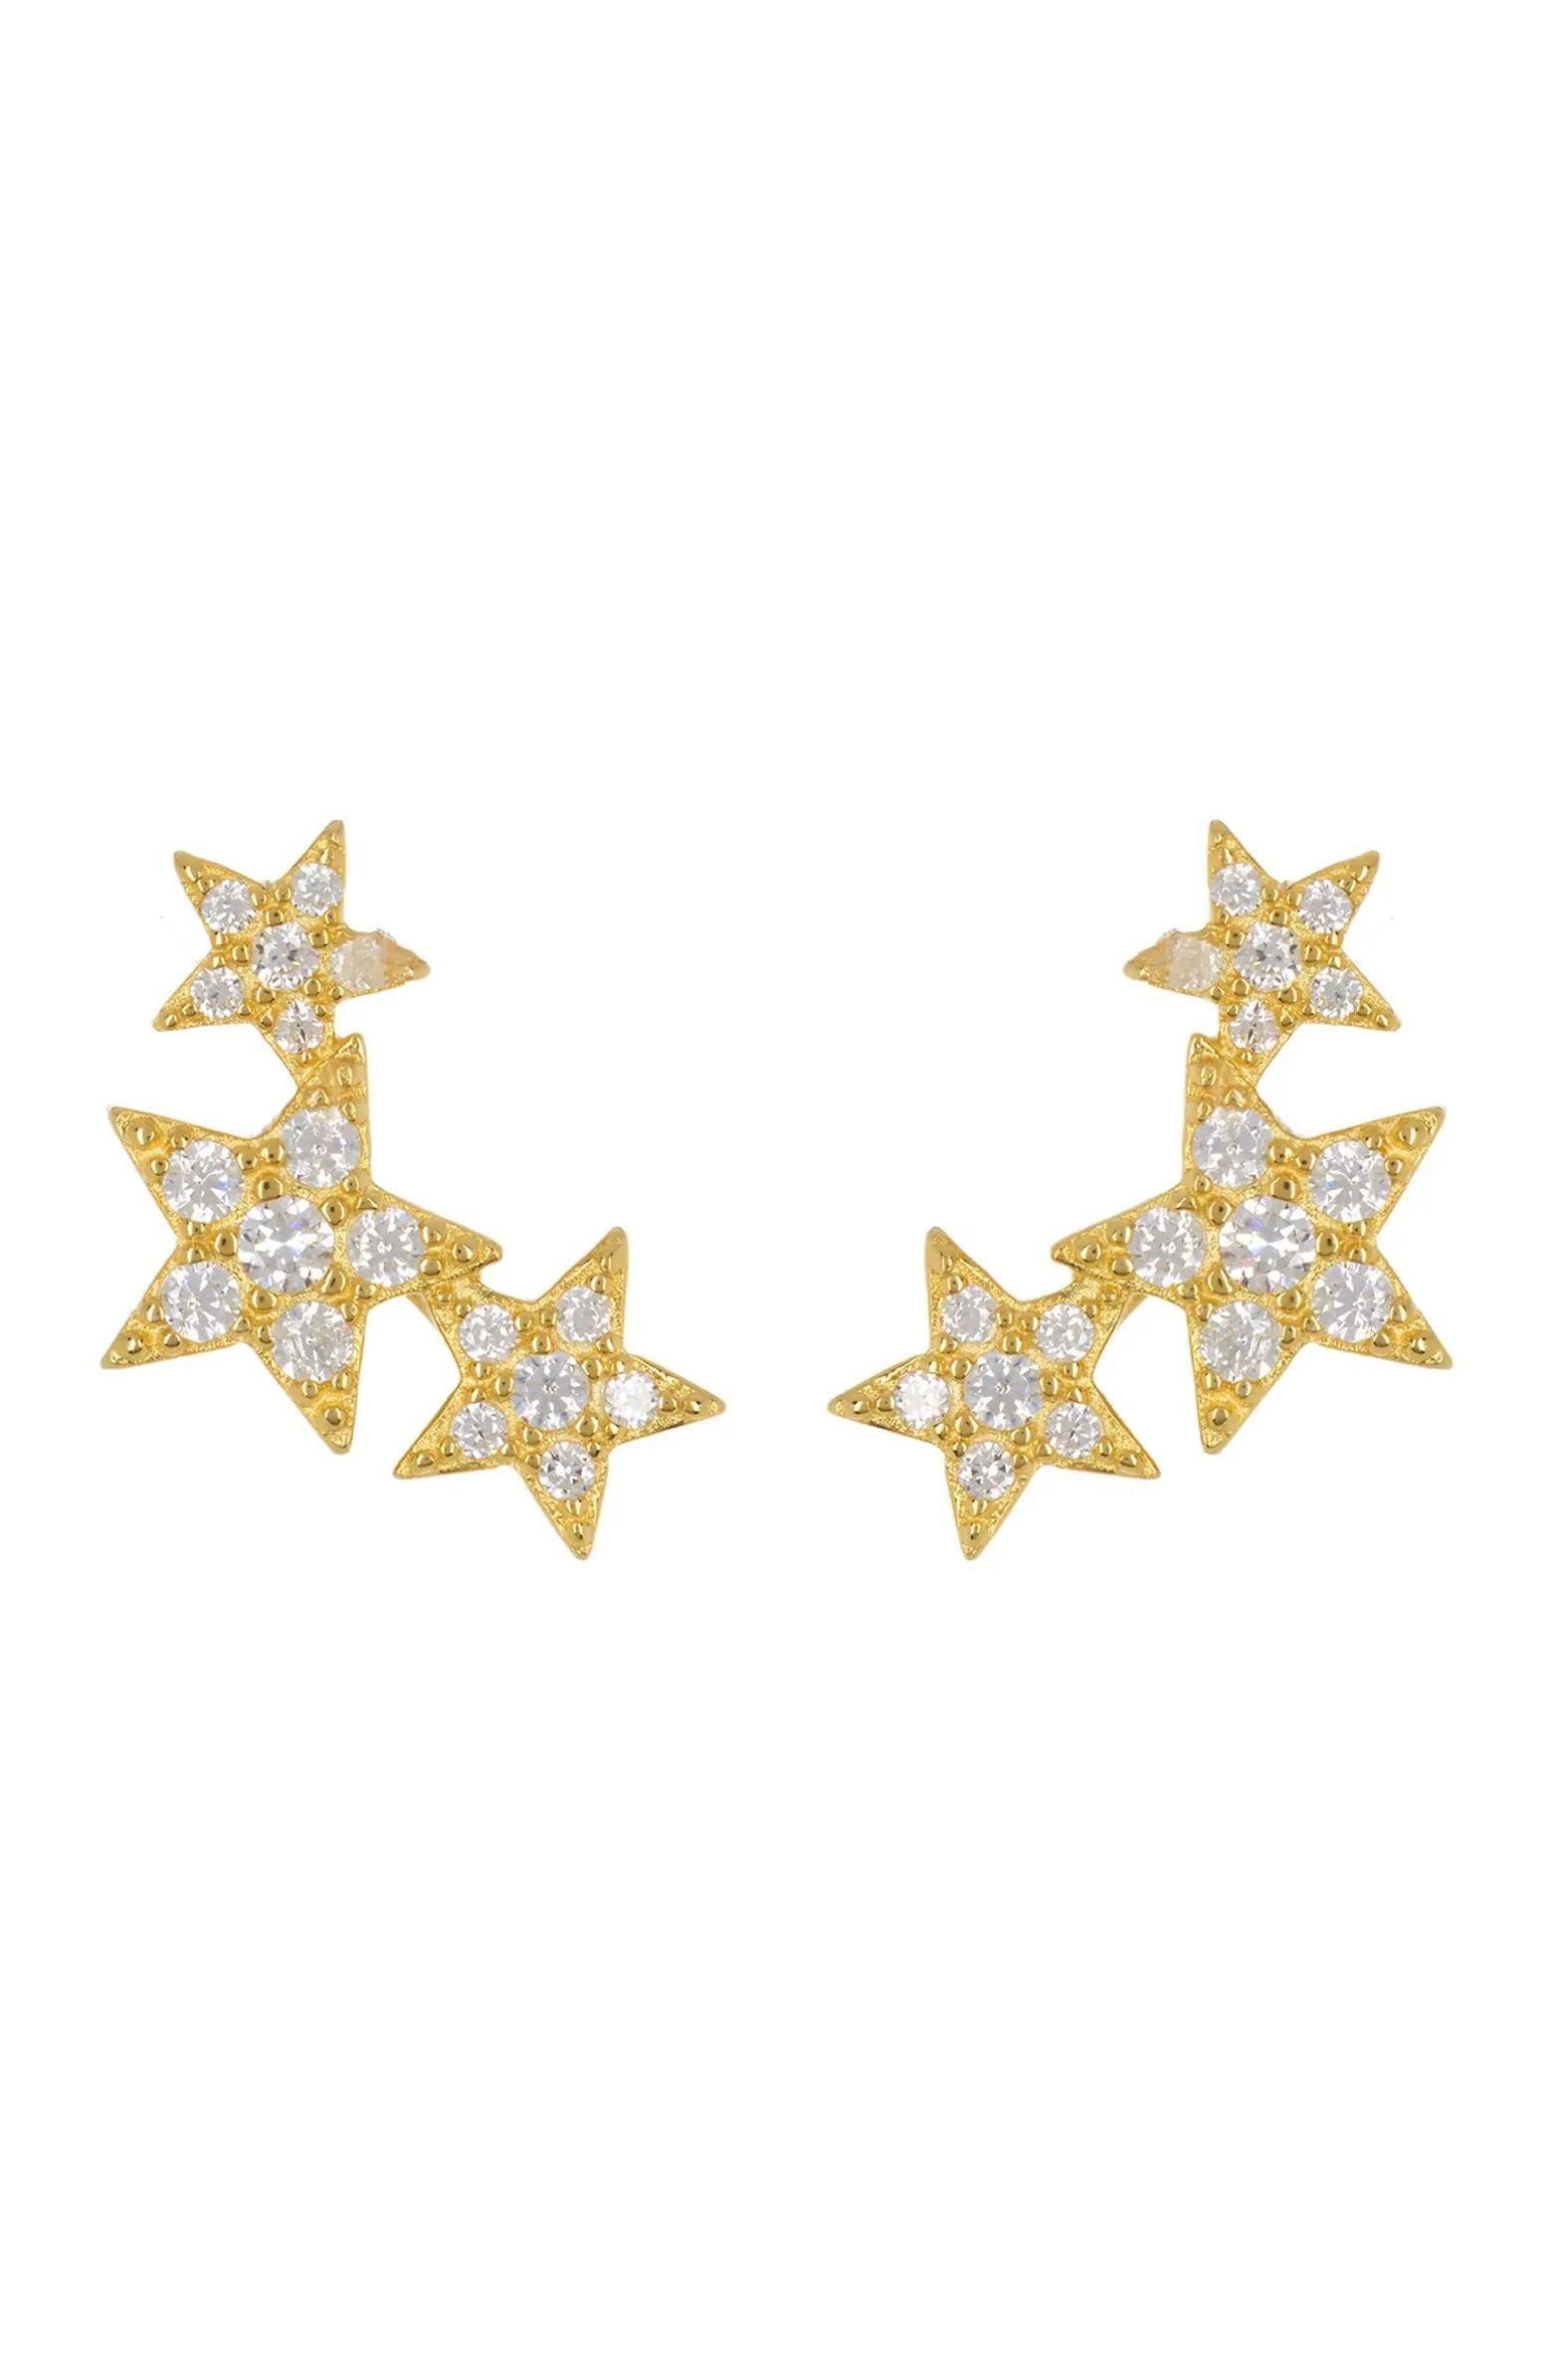 14K Yellow Gold Plated CZ Shooting Star Earrings | Nordstrom Rack